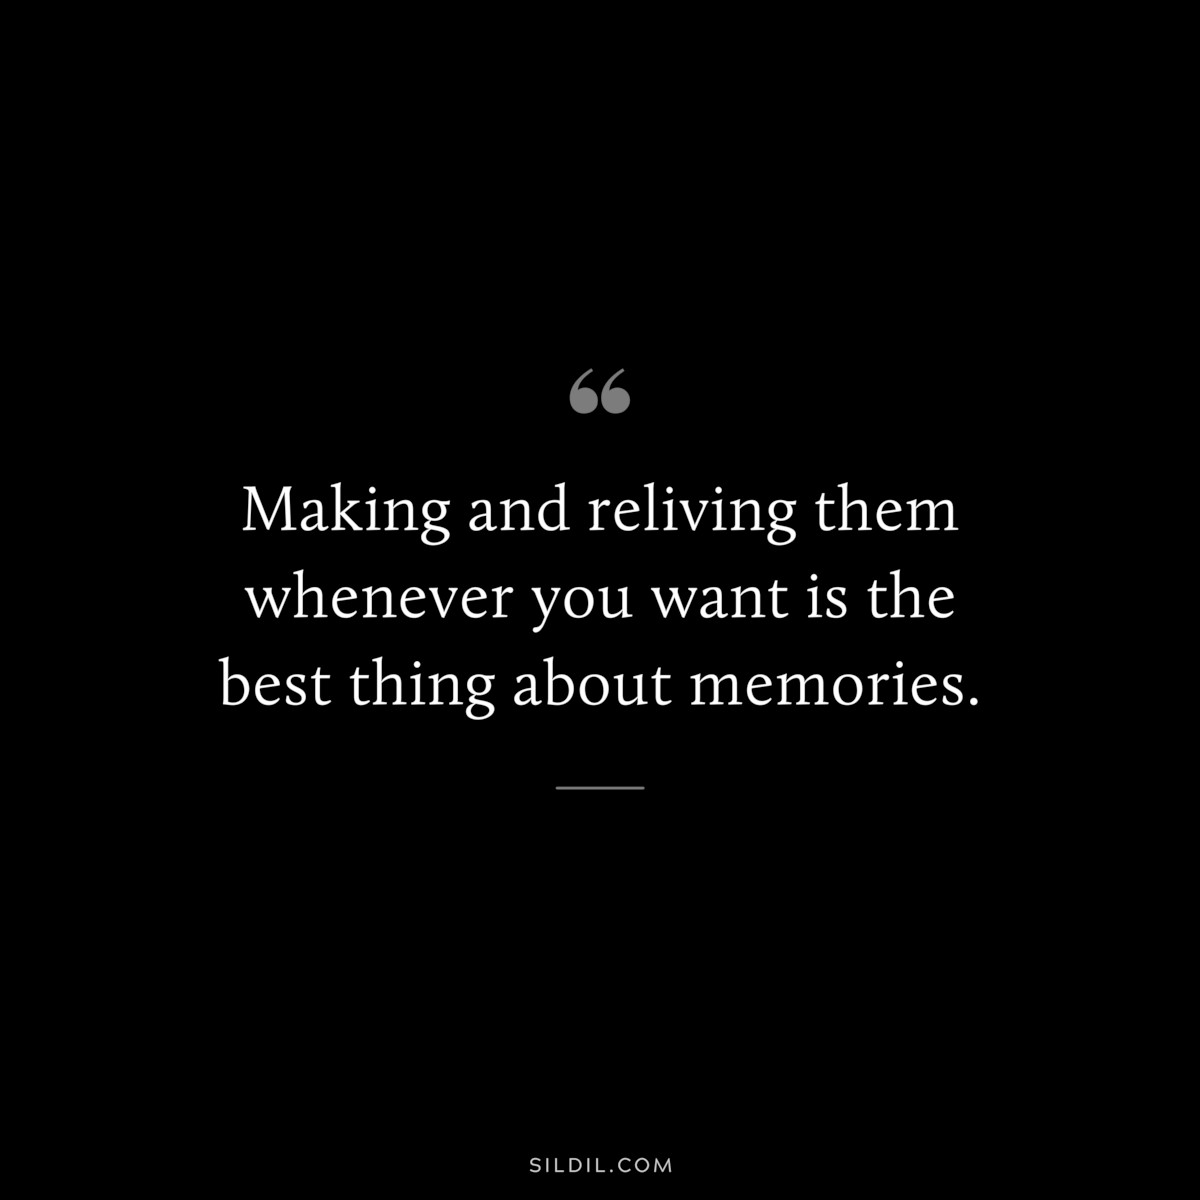 Making and reliving them whenever you want is the best thing about memories.